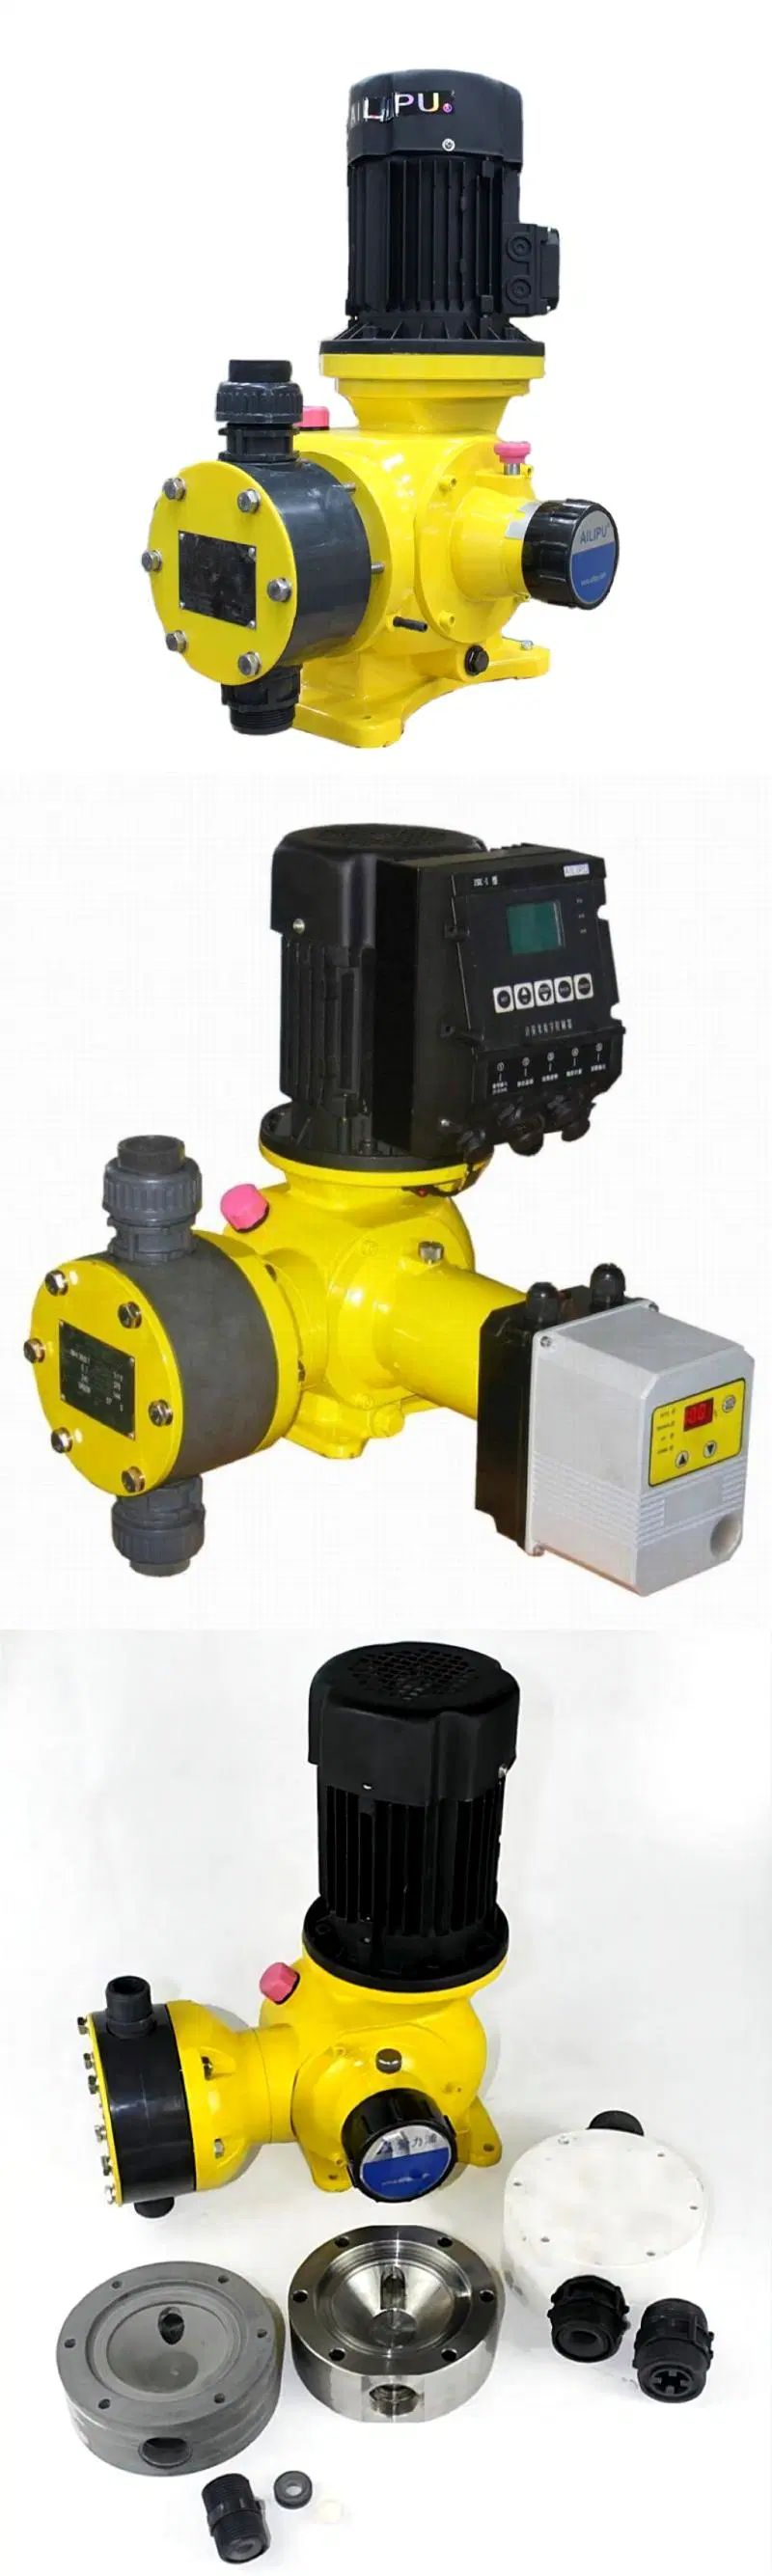 Jxm-a Series High Efficiency Chlorine Injection Pump for Chemical Industry